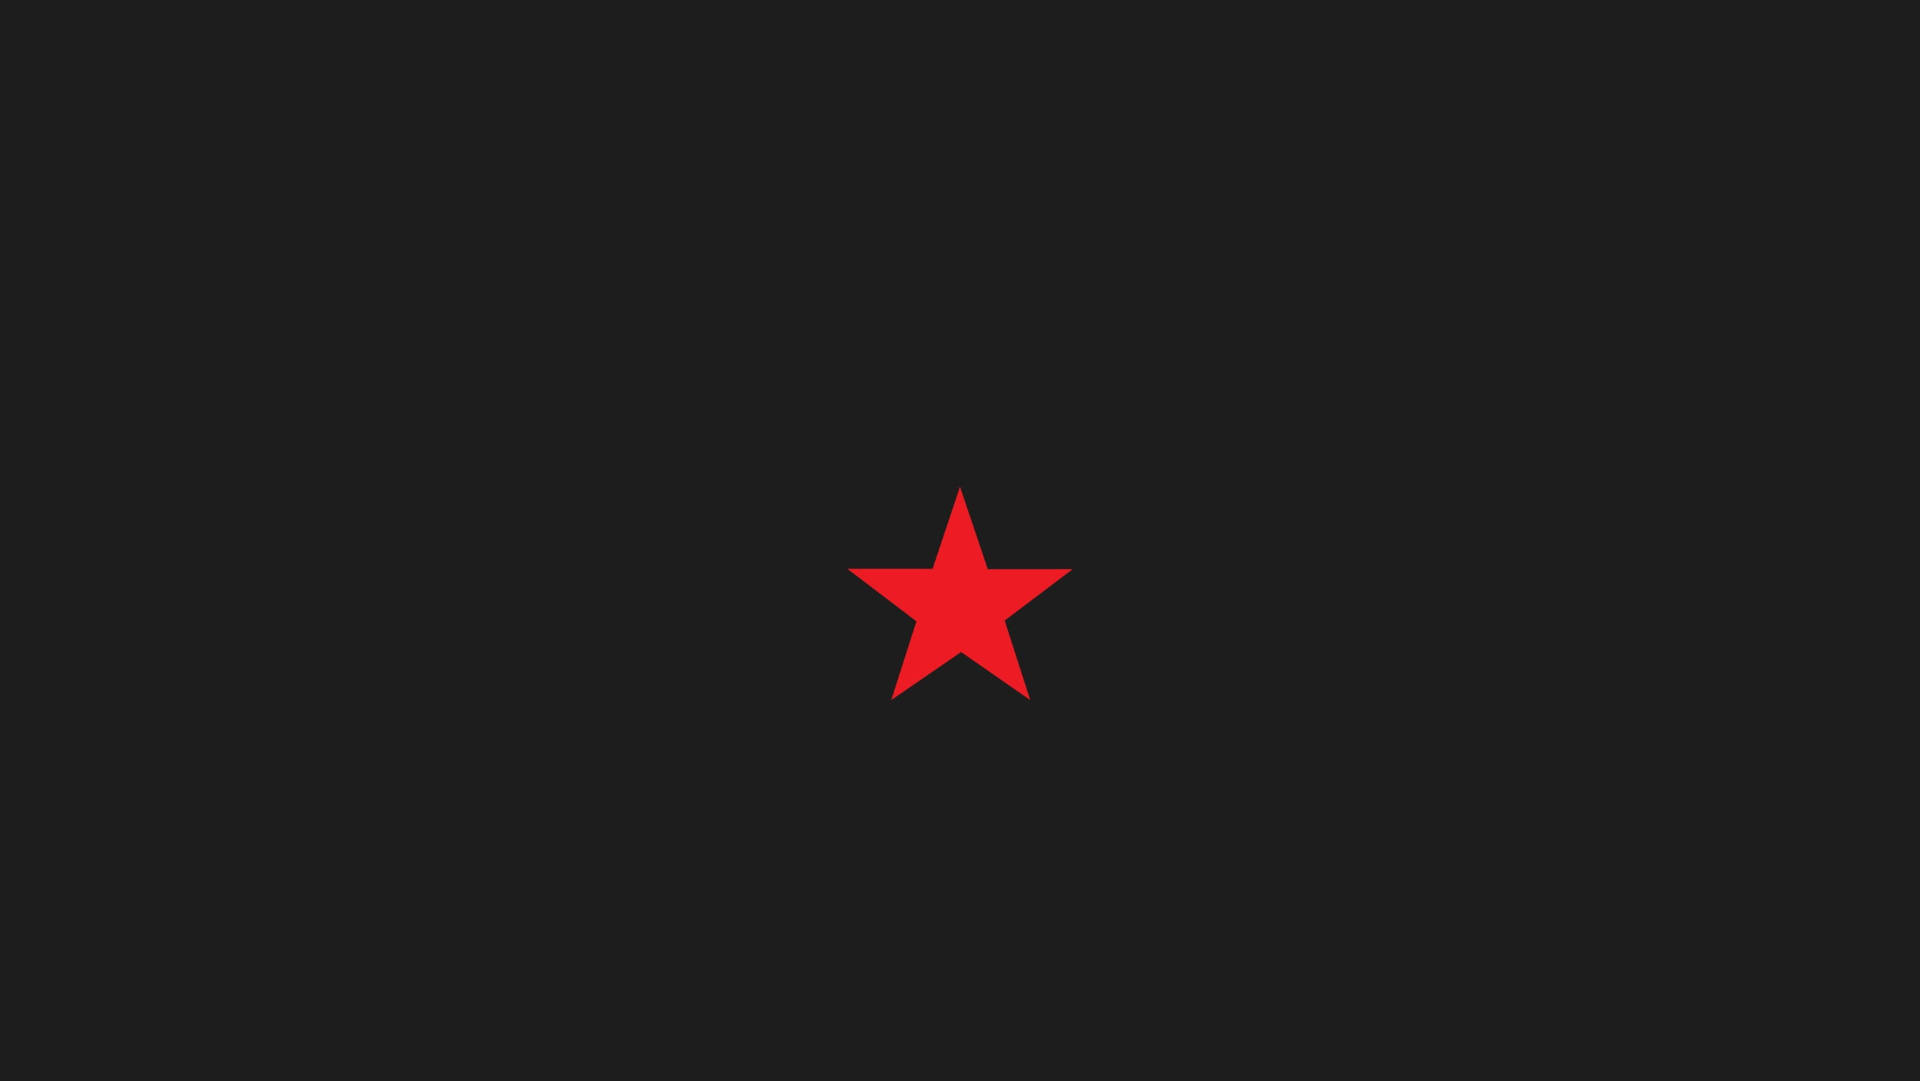 Top 999+ Red Star Wallpaper Full HD, 4K Free to Use